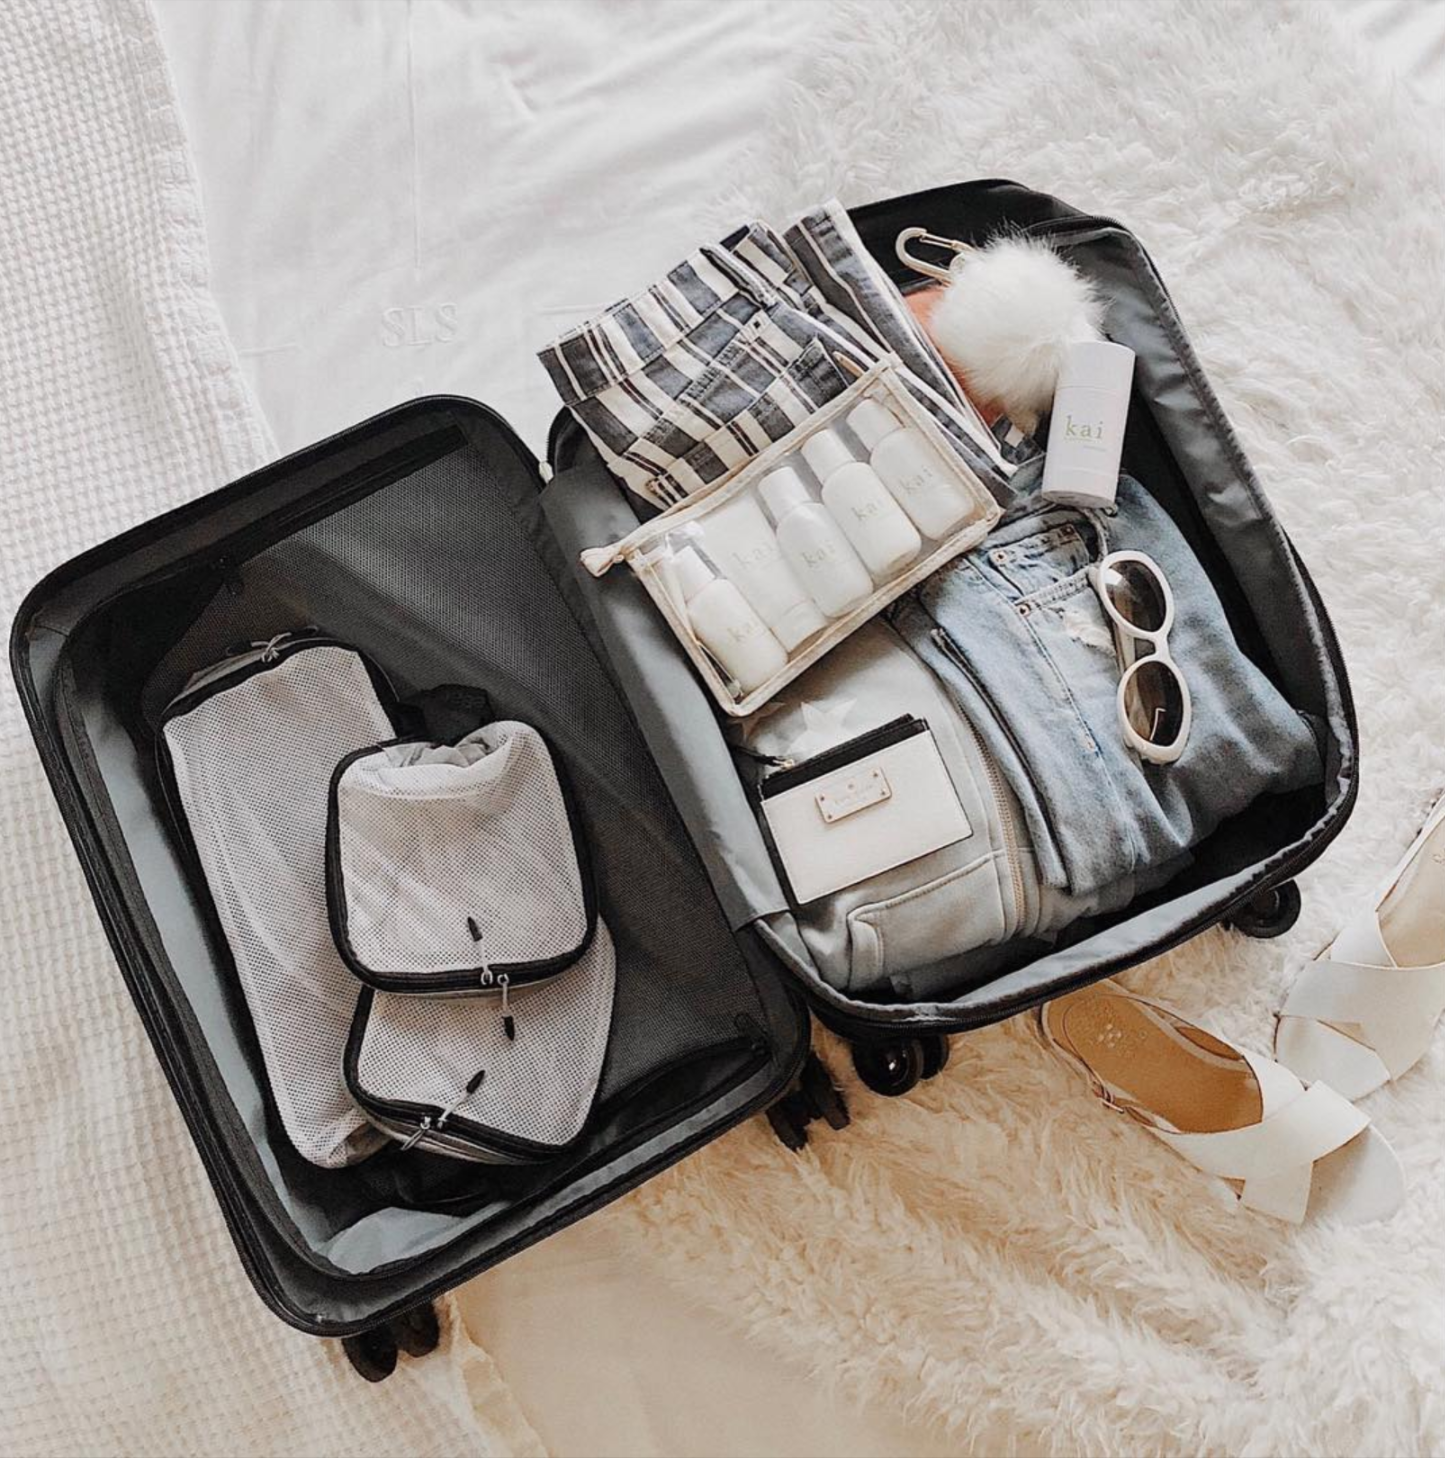 Photo of the inside of luggage. ENTITY shares why travel-sized bottles are one of the best Amazon products for travelers.